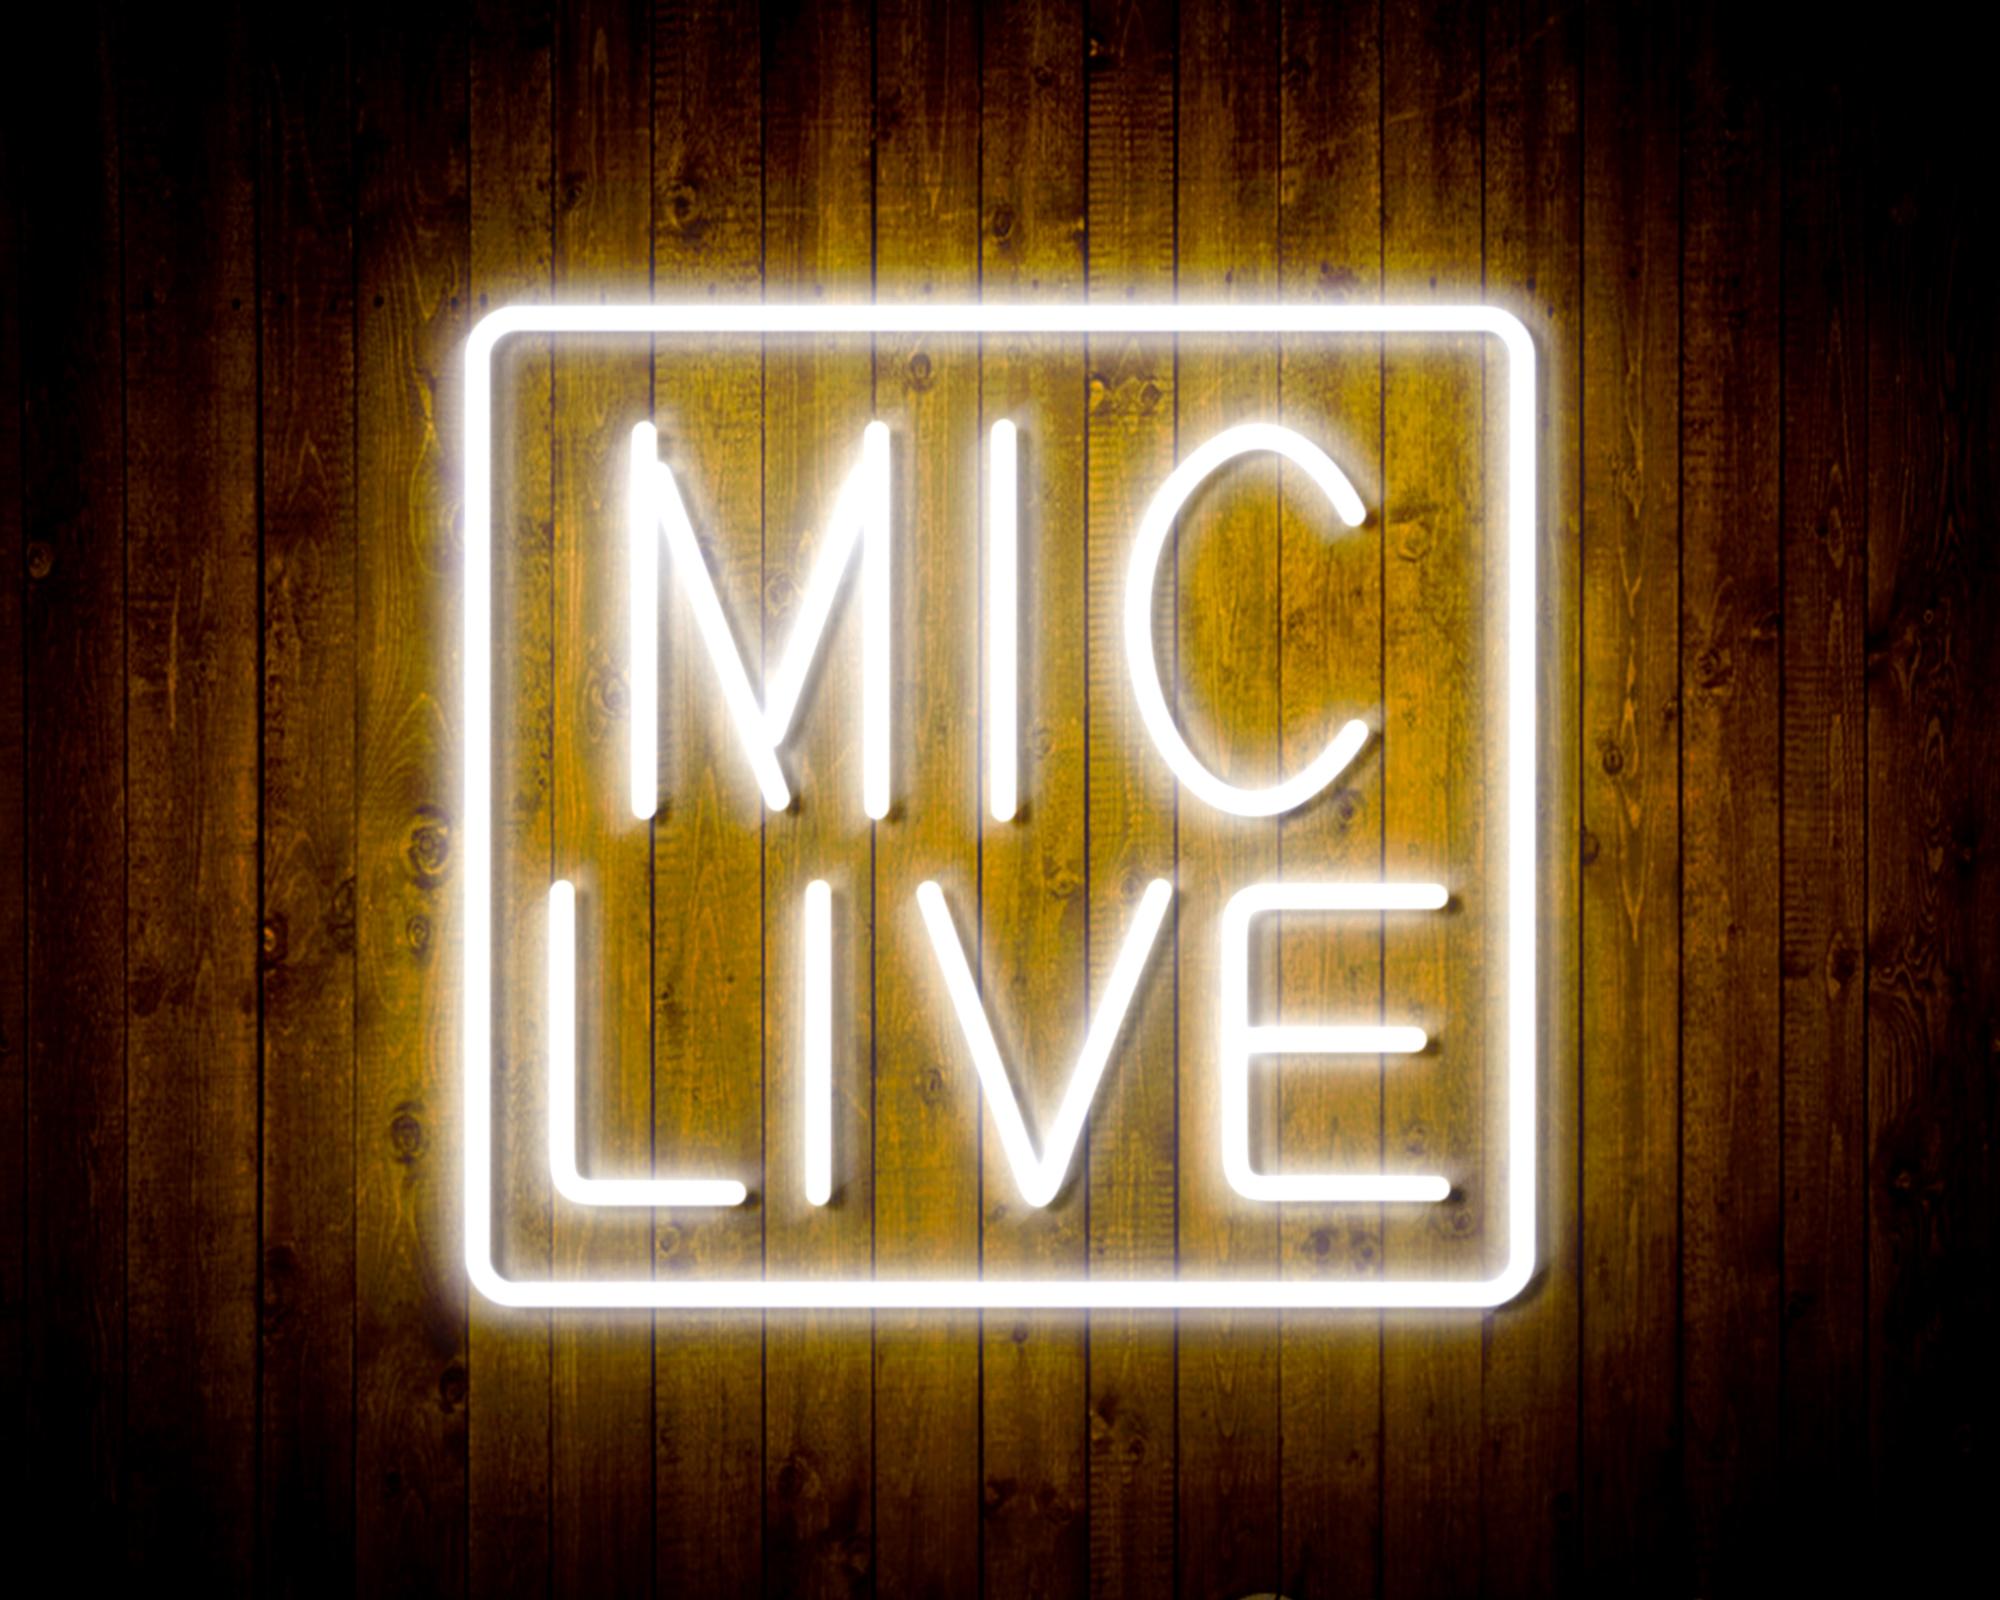 Mic Live LED Neon Sign Wall Light